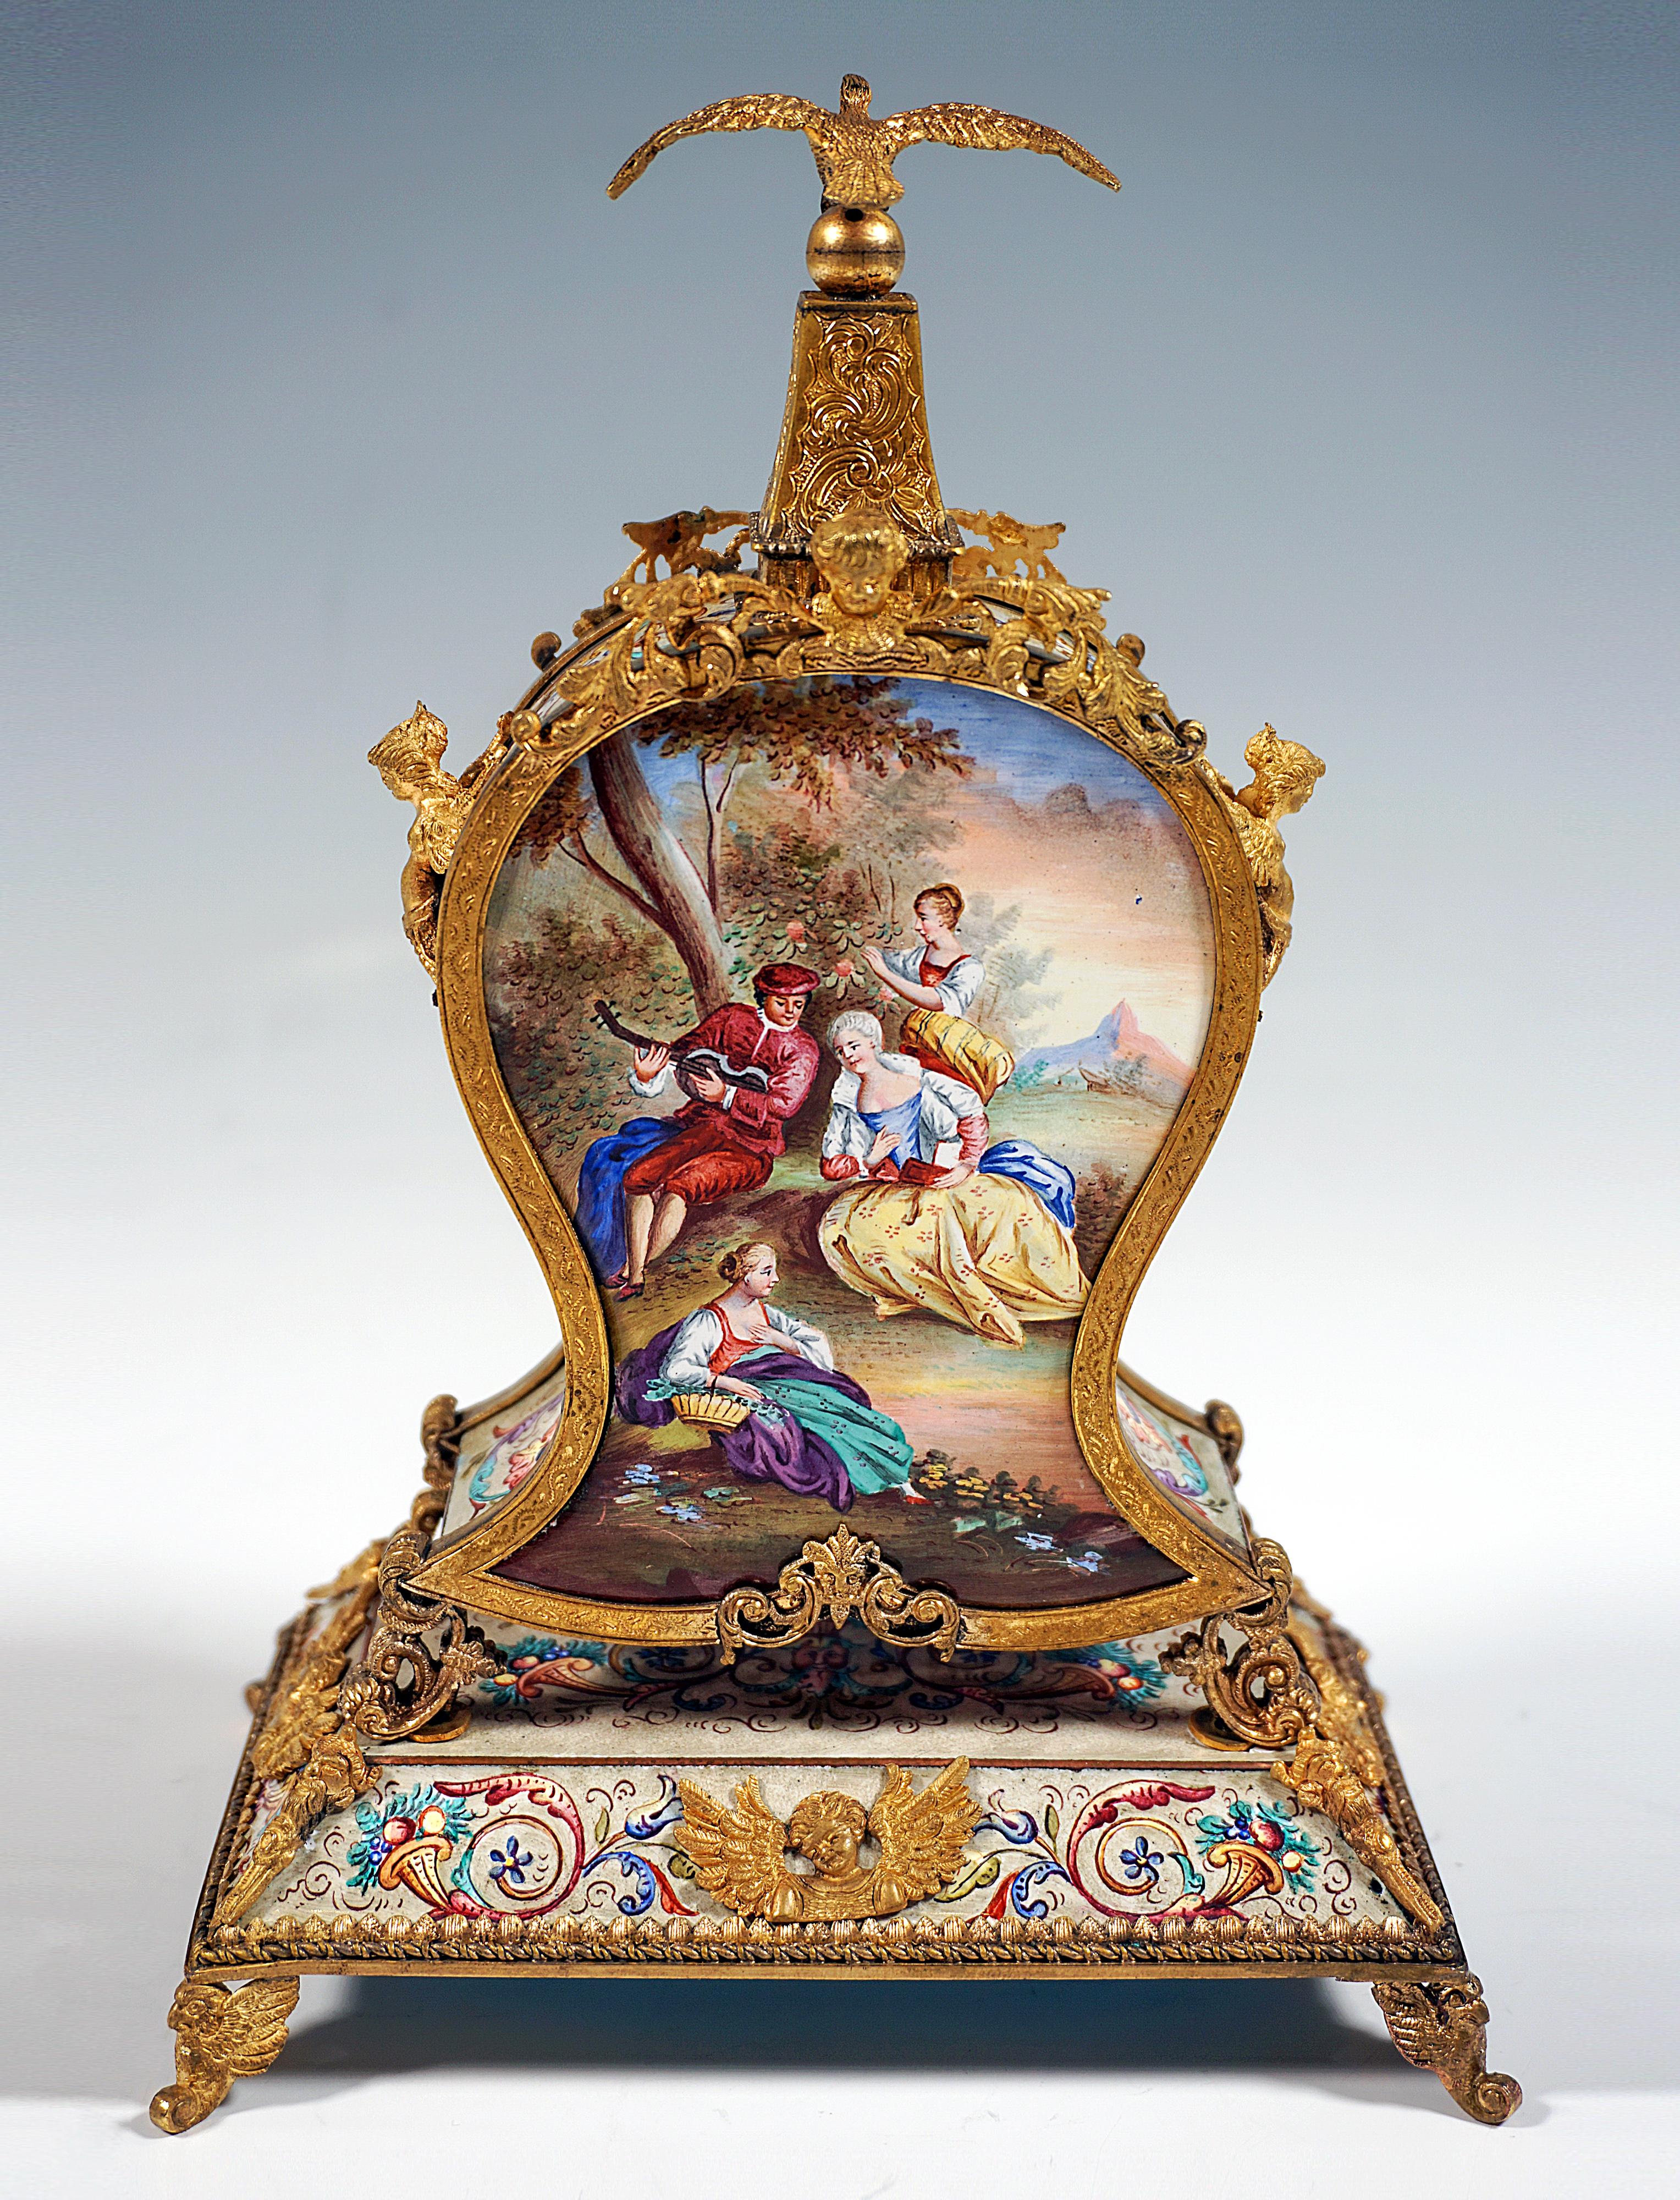  Viennese Gilt Silver & Enamel Table Clock With Gallant Scenes Painting, Ca 1880 1